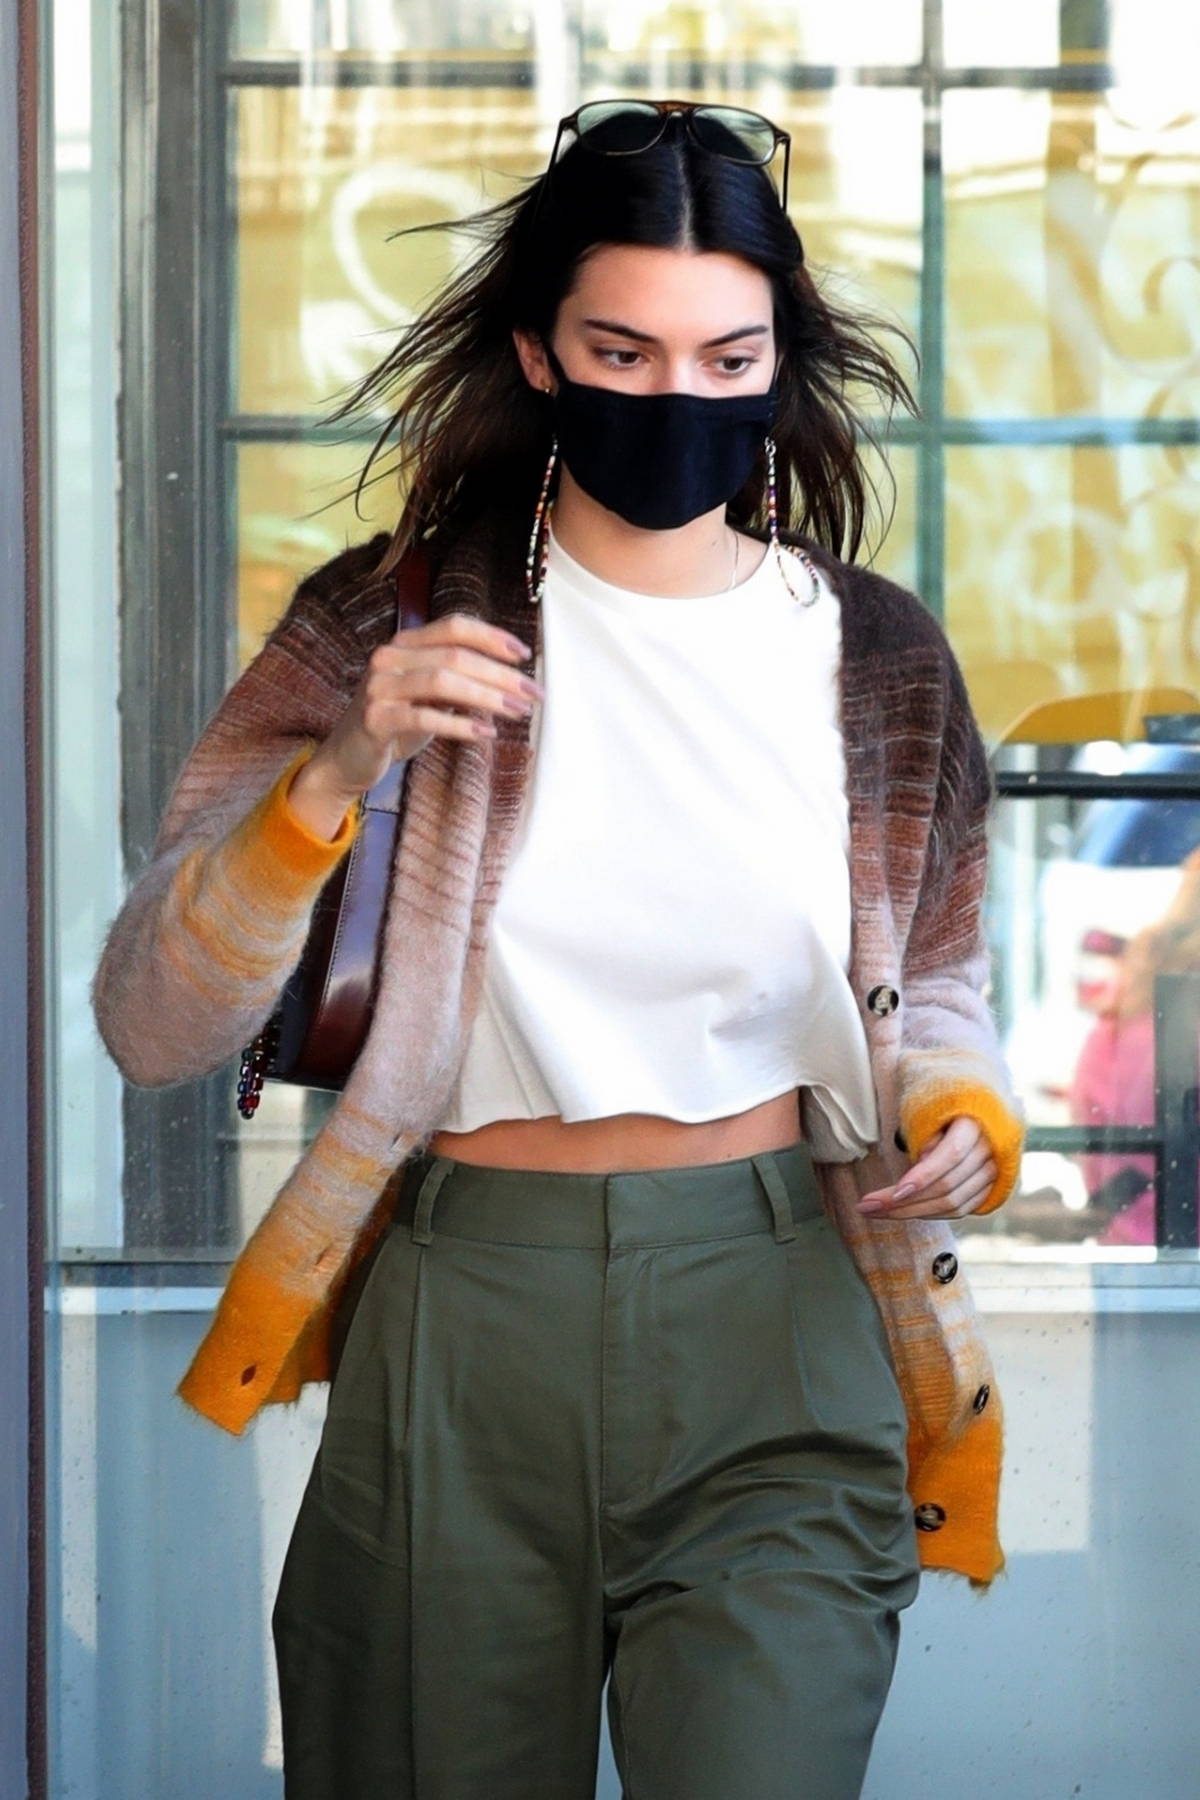 Kendall Jenner Steps Out for Breakfast with Friends